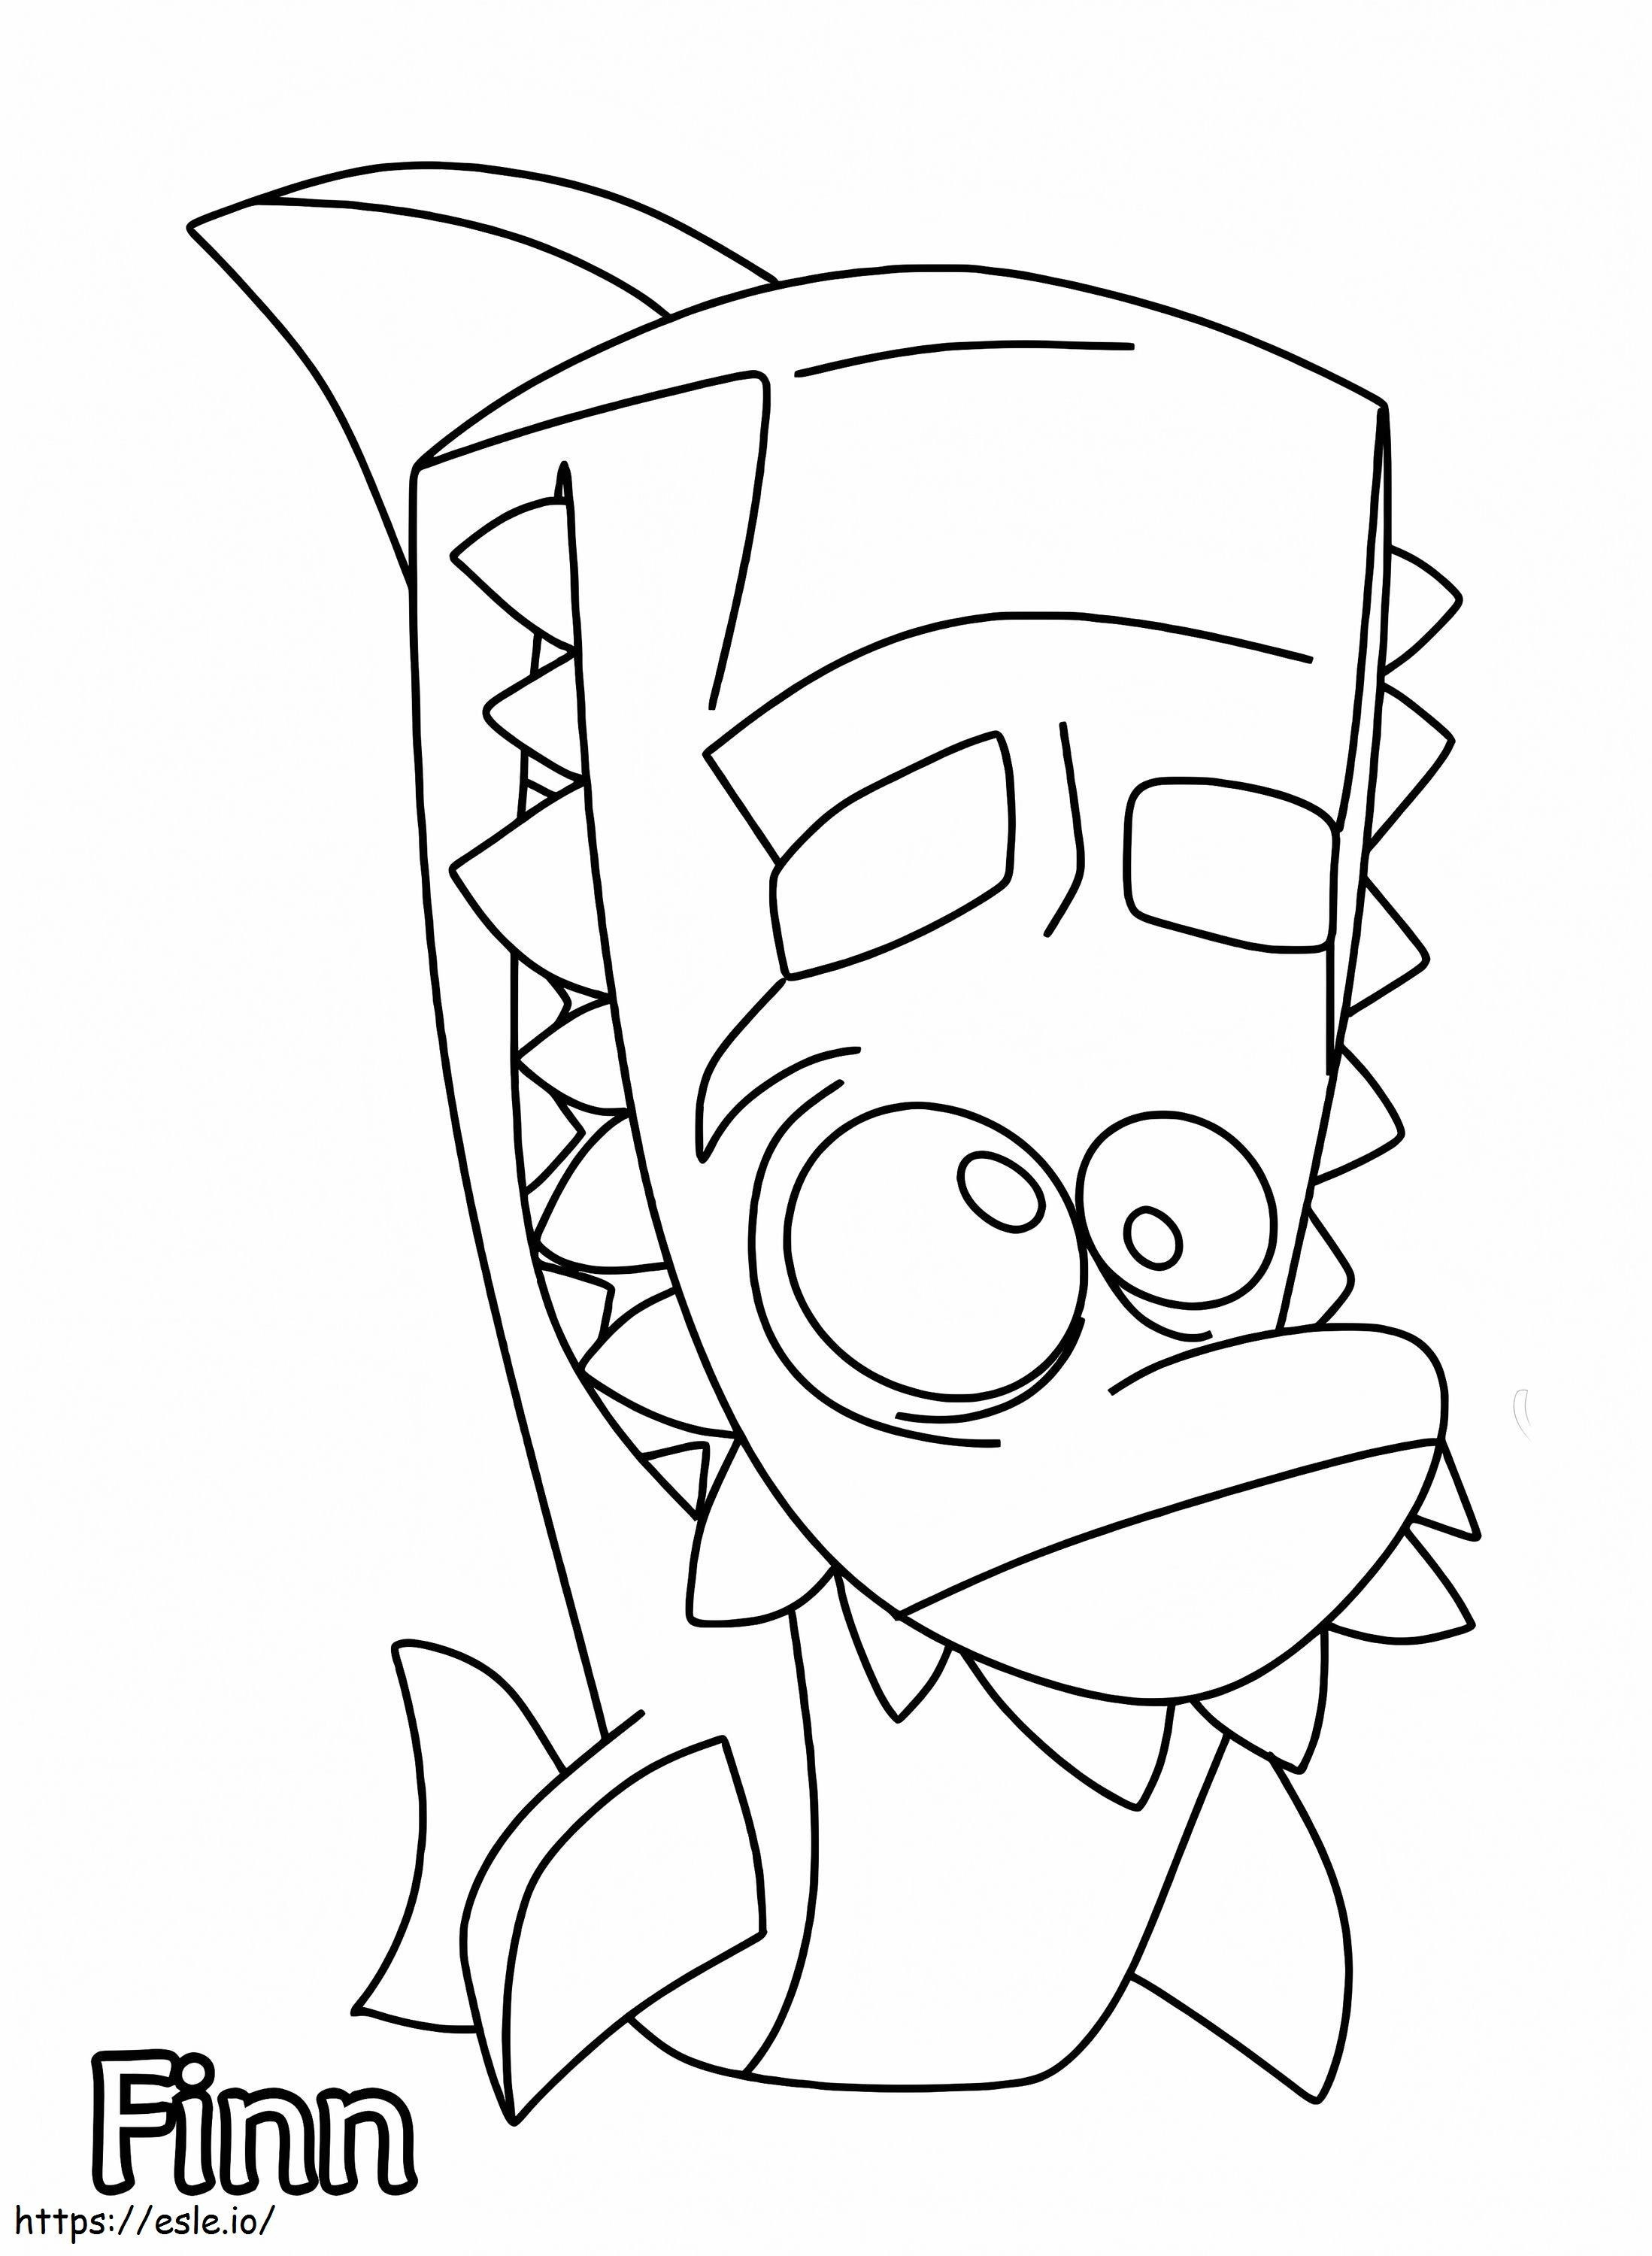 Finn Zooba coloring page